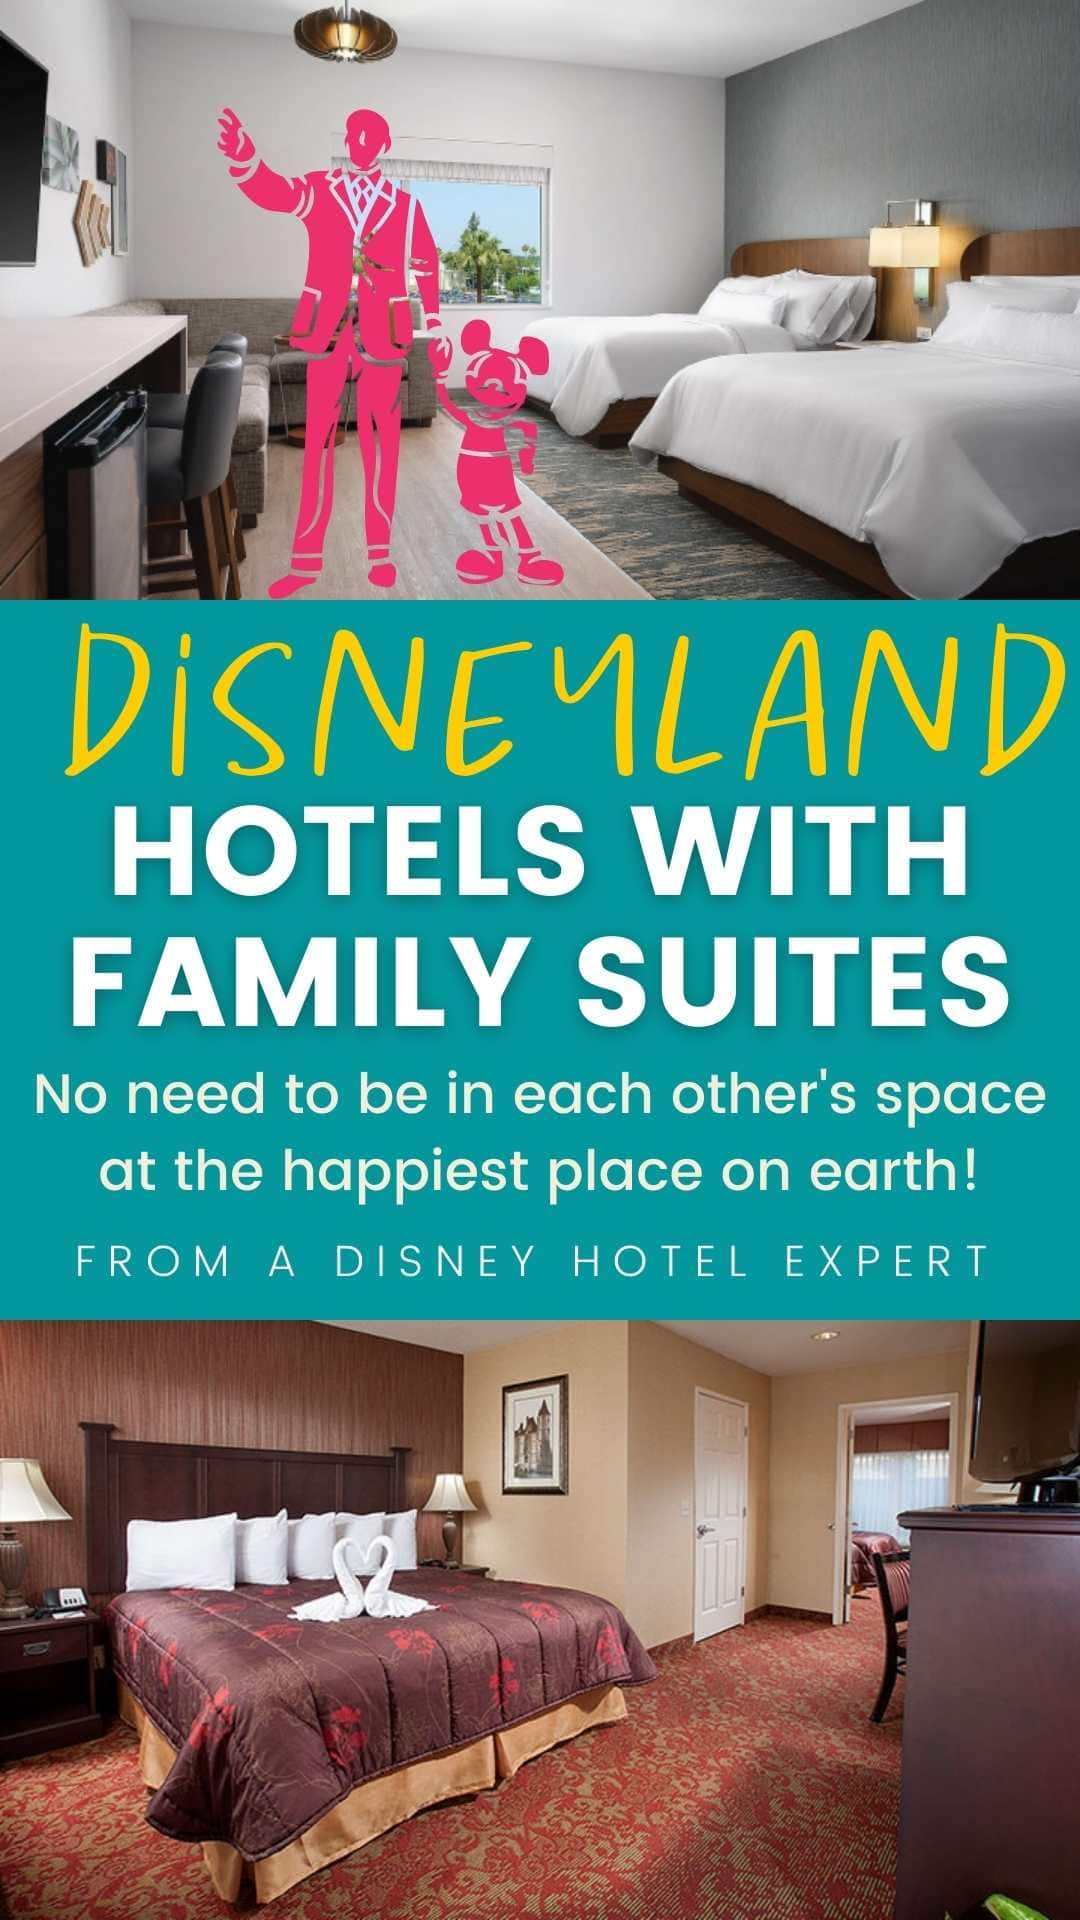 Disneyland hotels have a variety of room types to choose from, including family suites that can accommodate up to eleven people. These suites are perfect for families with small children, as they include a bedroom and a living area with a sofa bed. If you're looking for accommodation that will accommodate your whole family, be sure to check out the Disneyland hotel family suites! via @pullingcurls